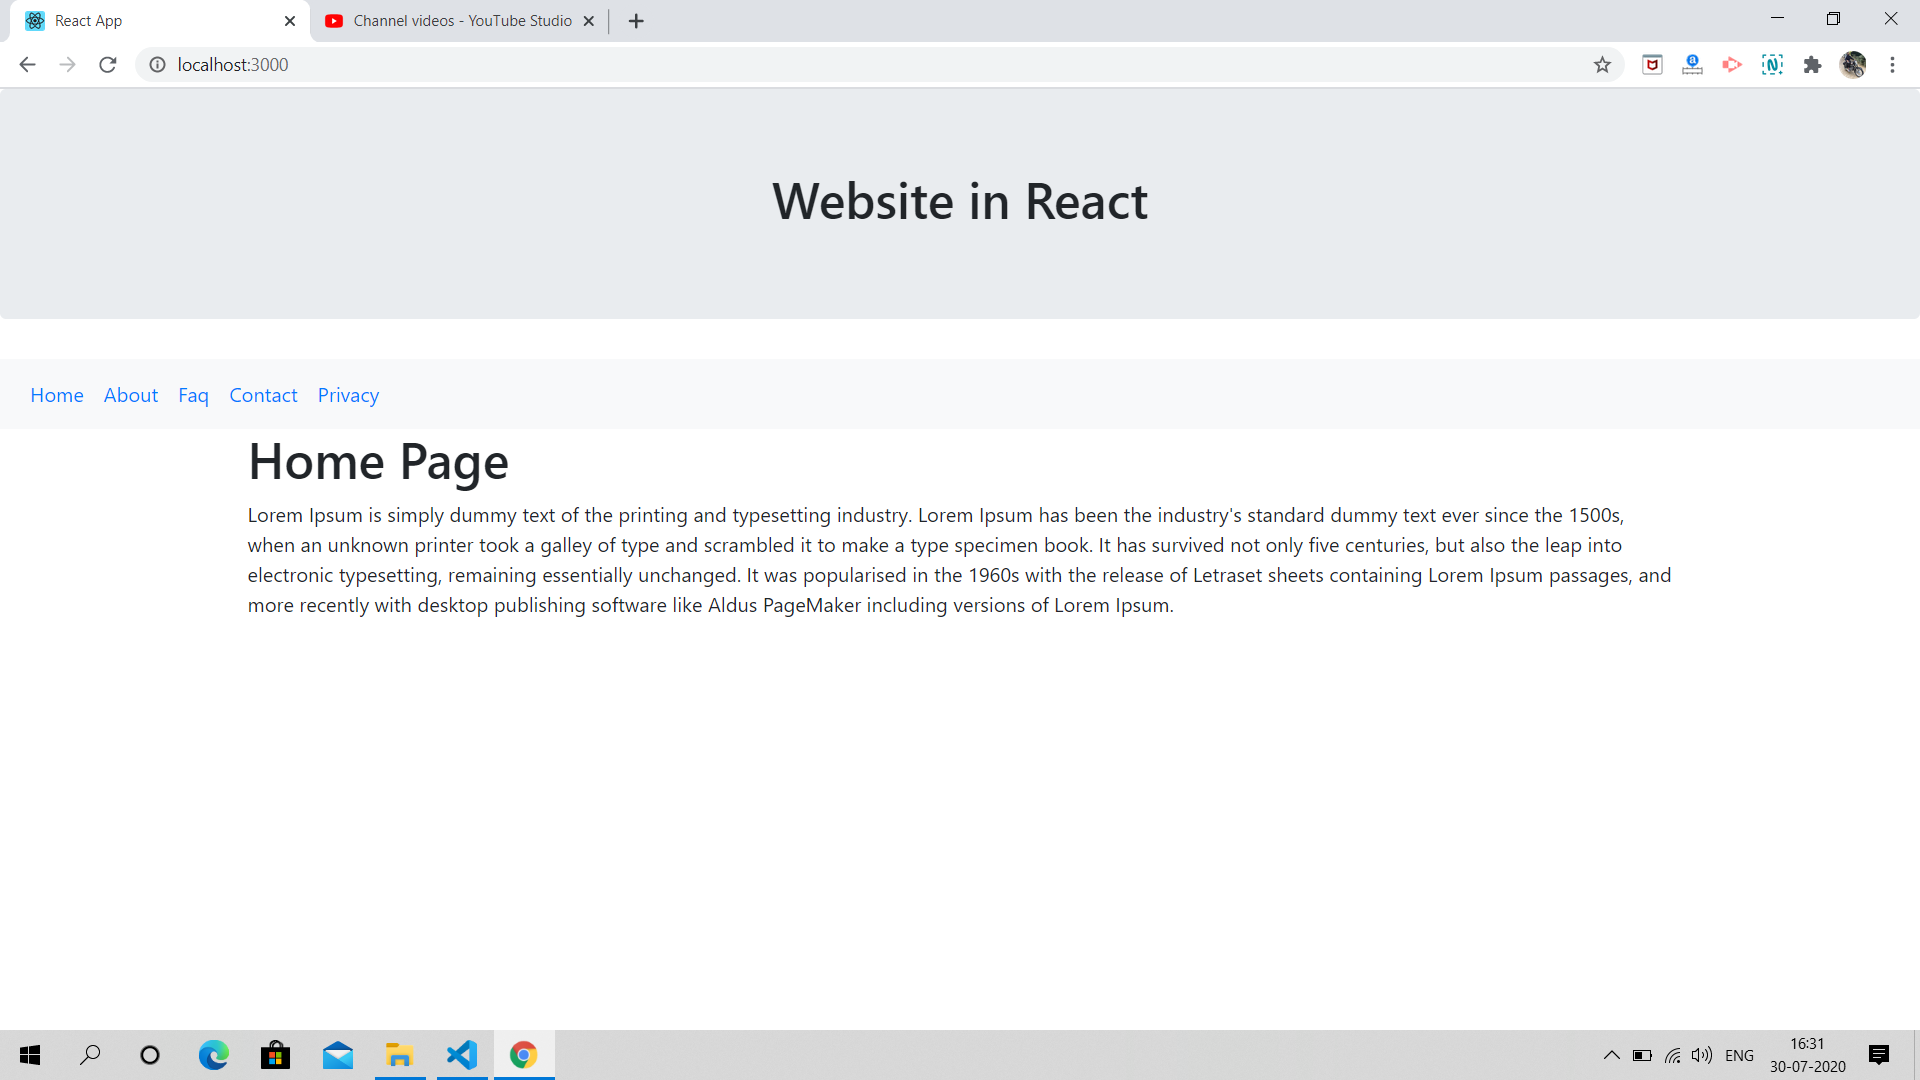 How to create 5 pages website in Reactjs?